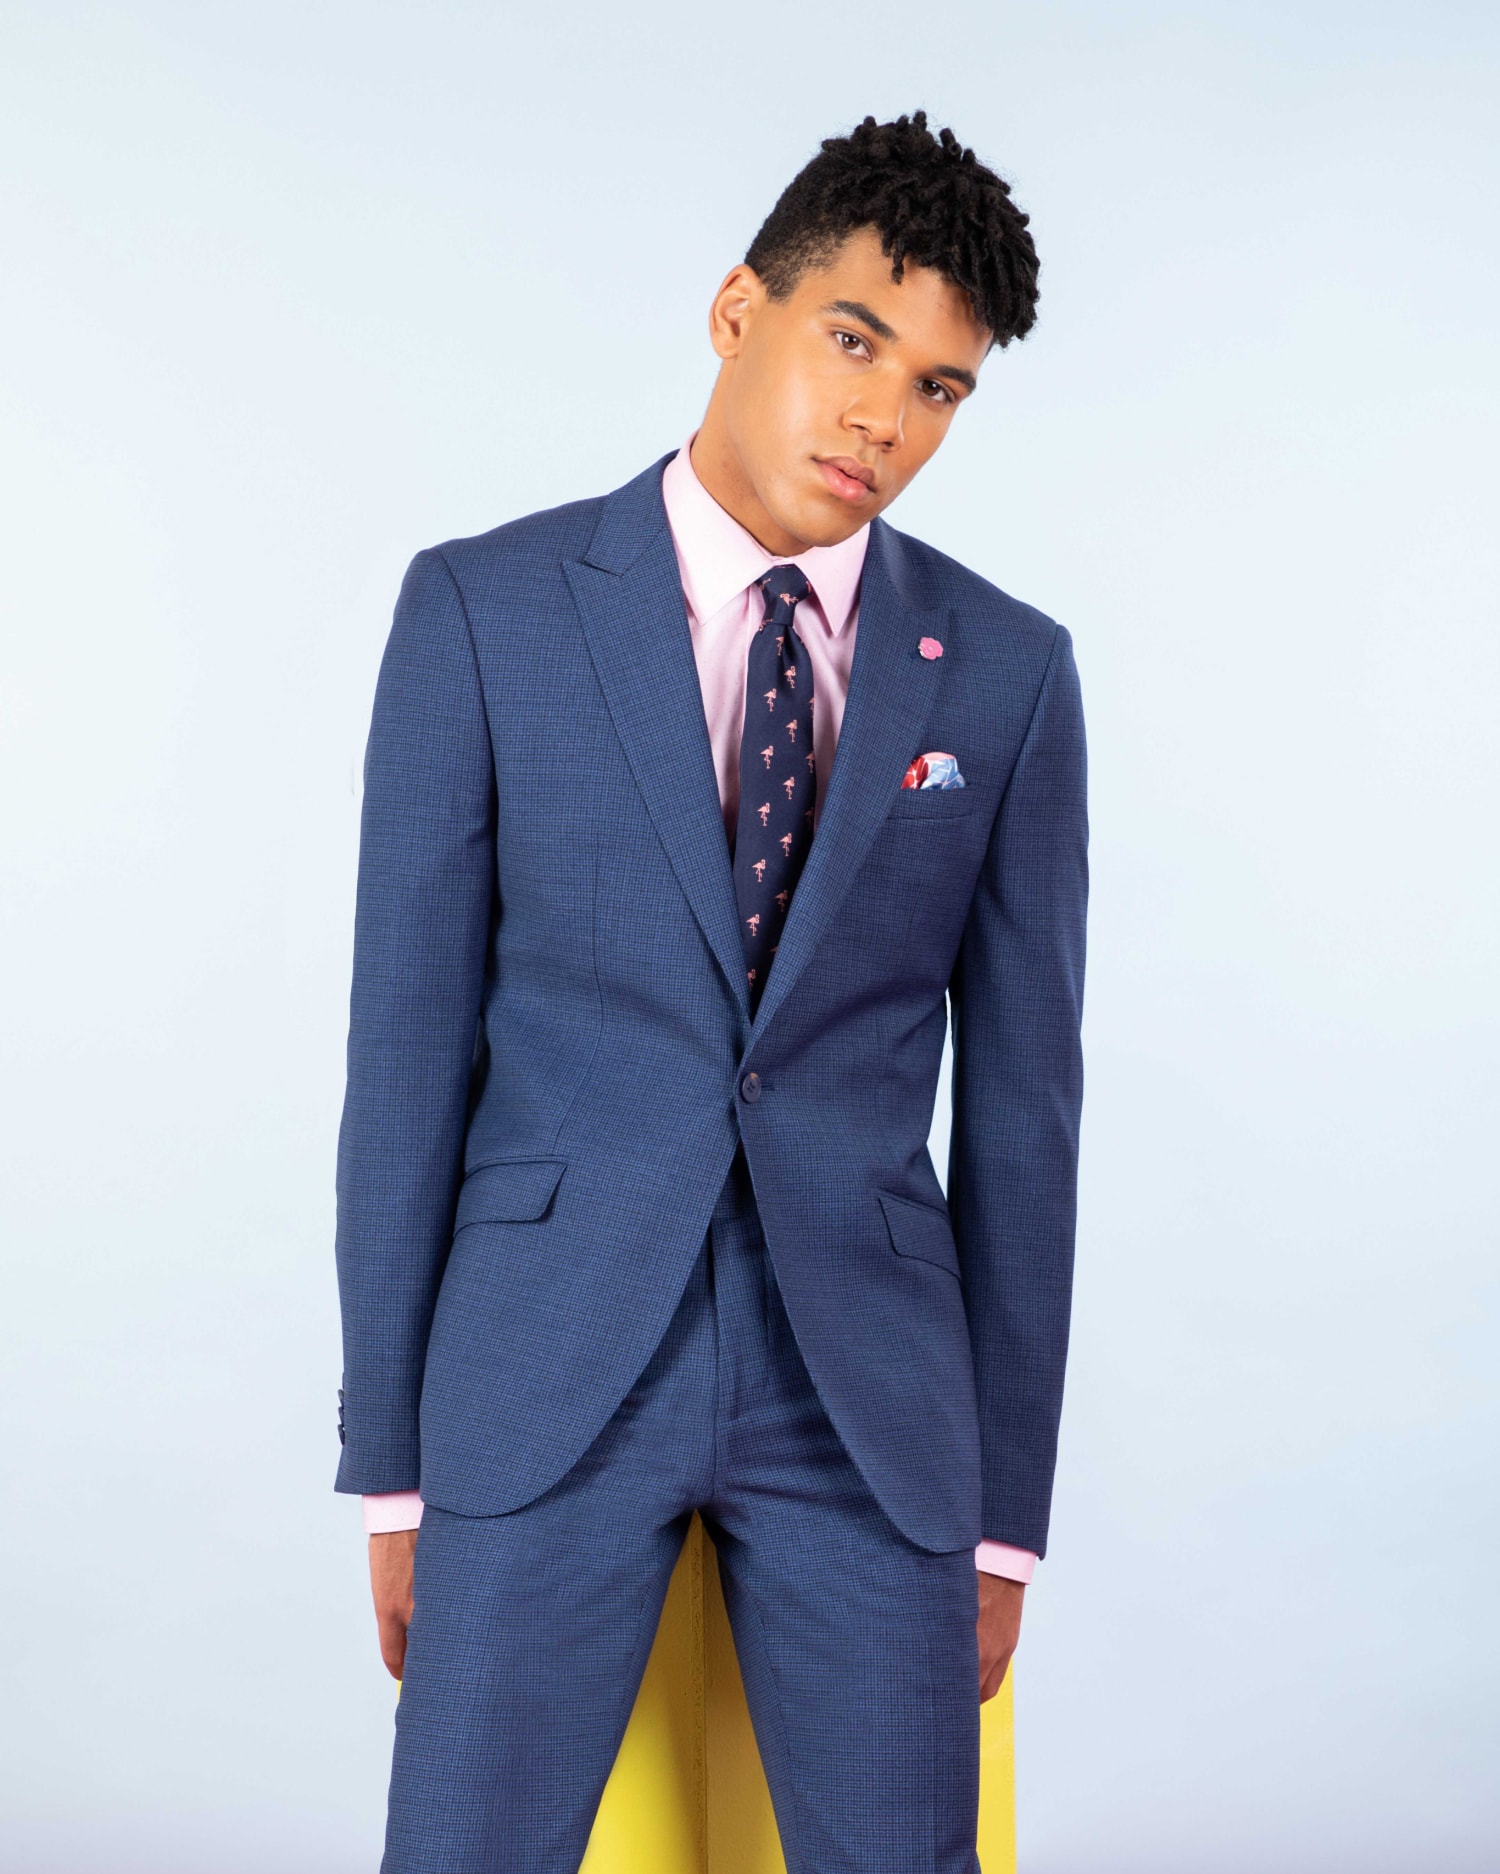 Men's Wedding Suit Ideas, Styles and Attire: Find an Outfit That